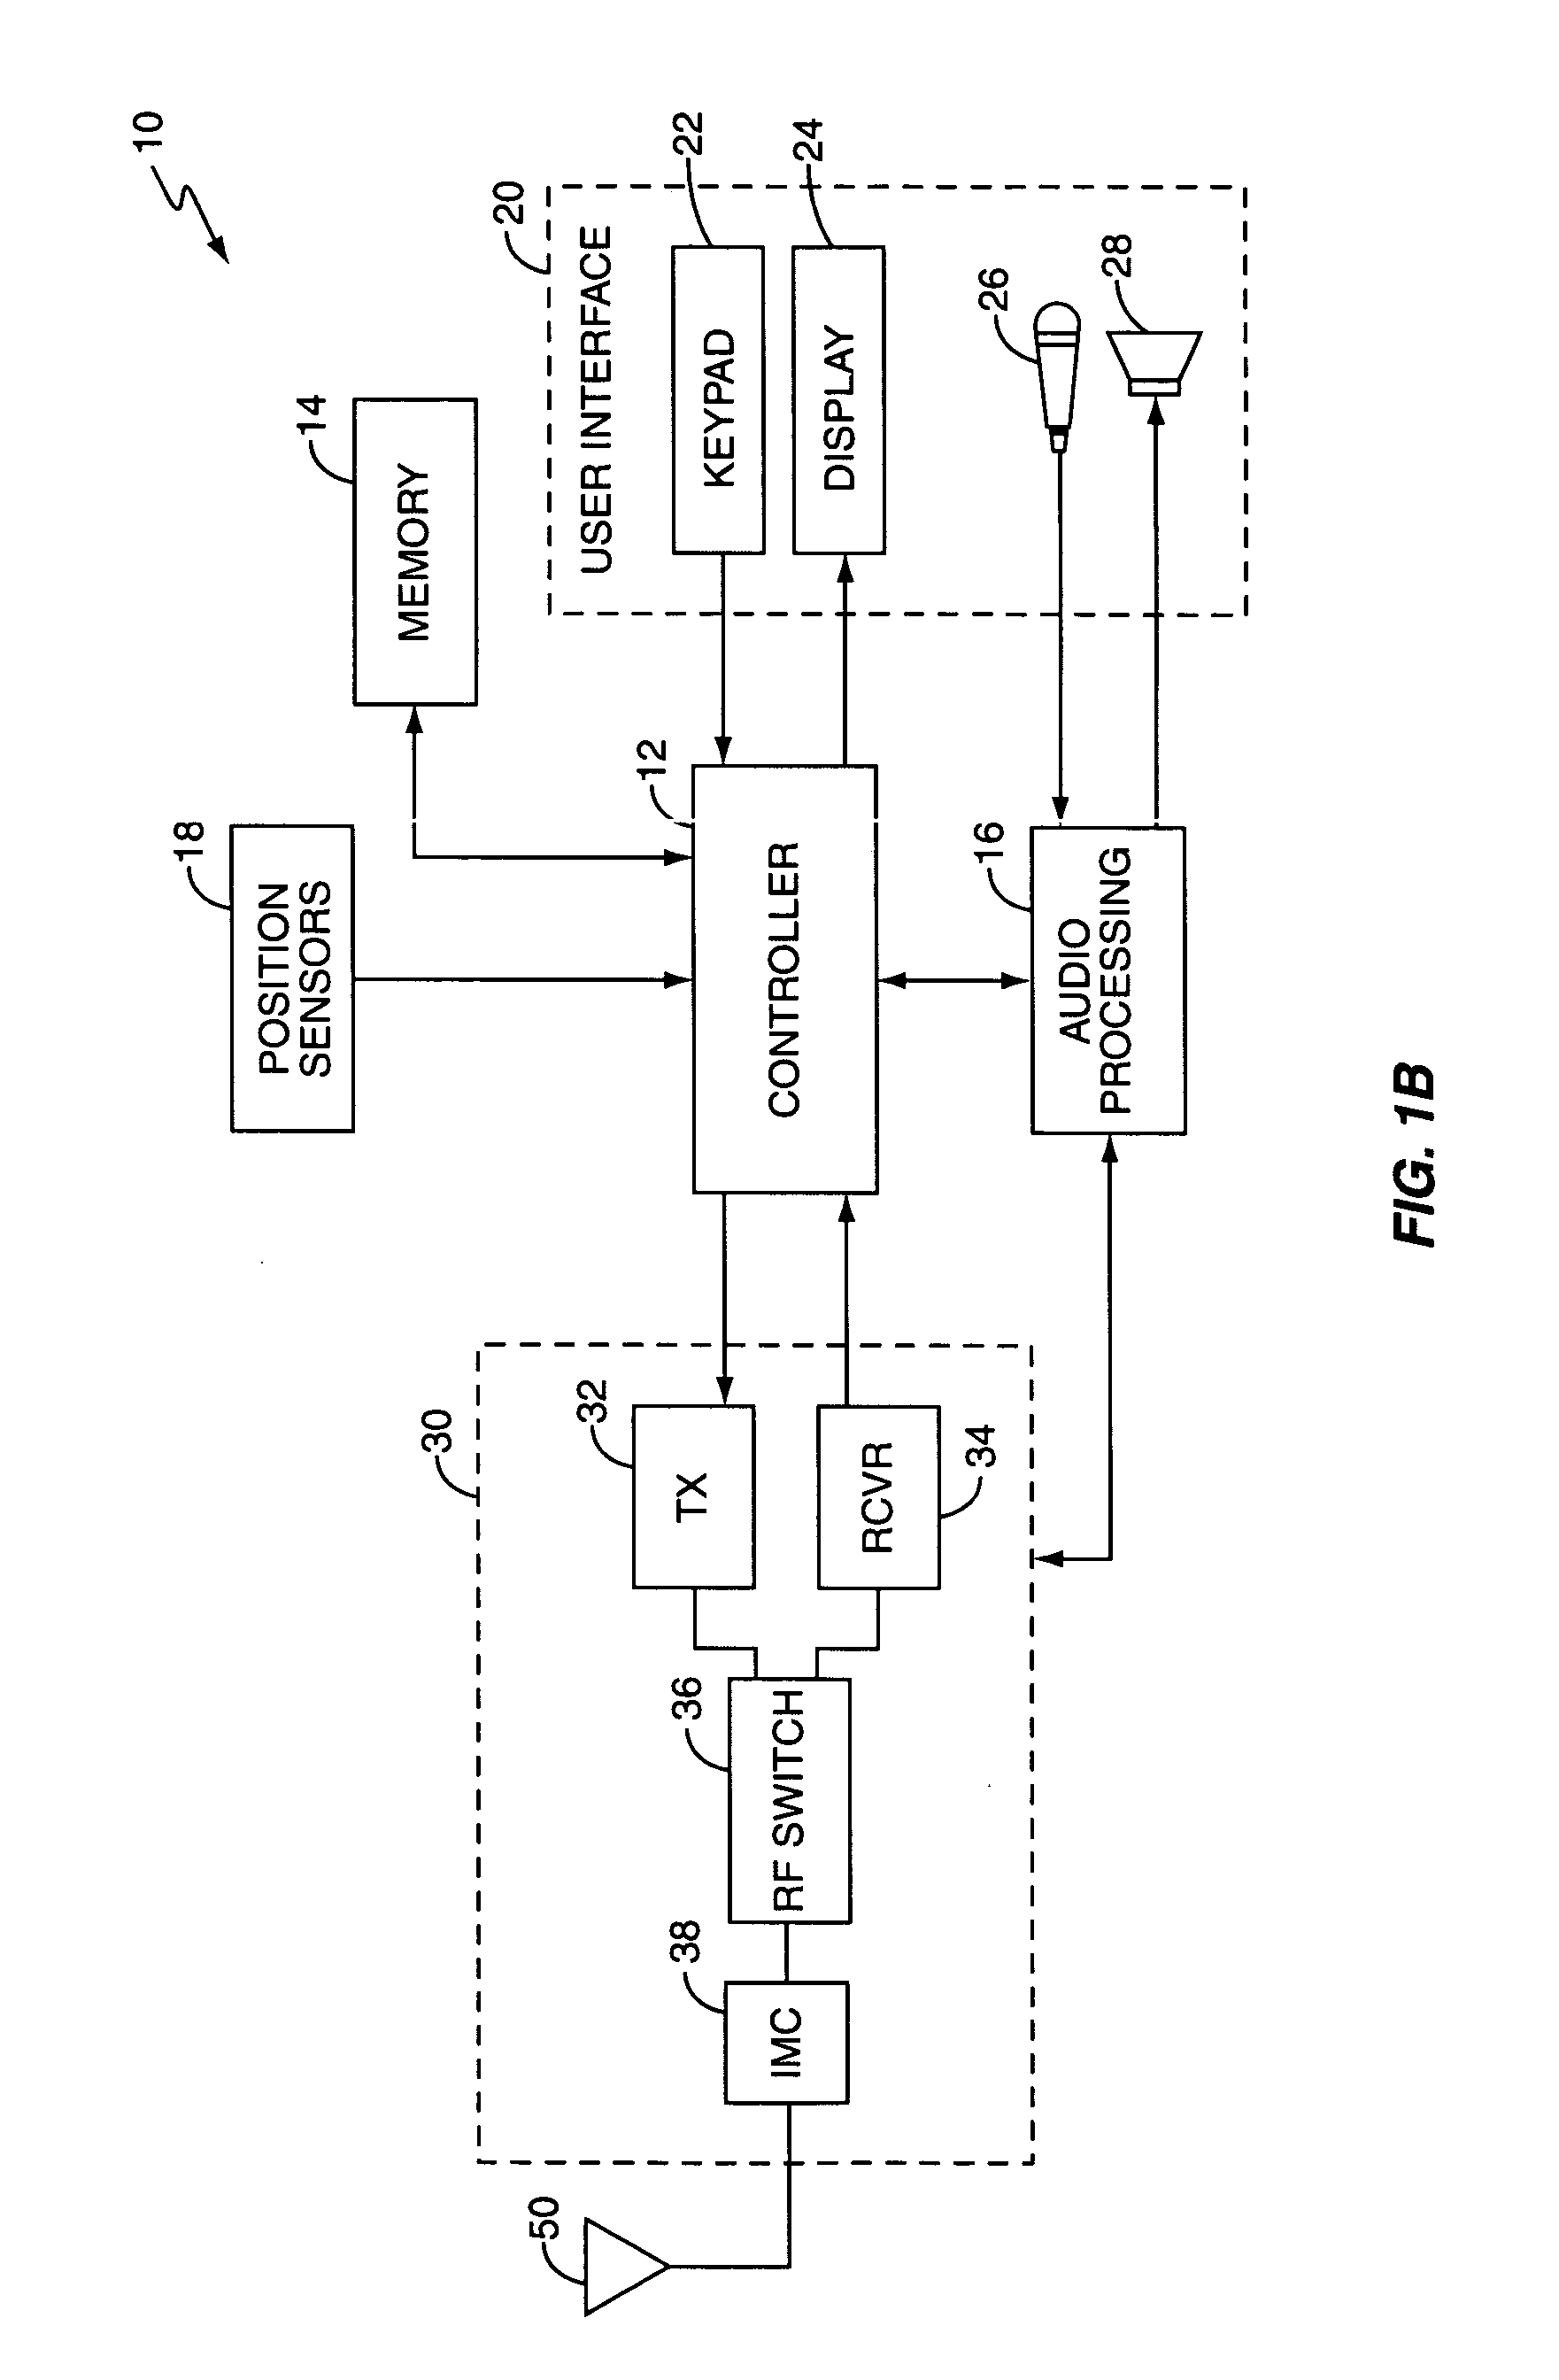 Impedance matching circuit for a mobile communication device